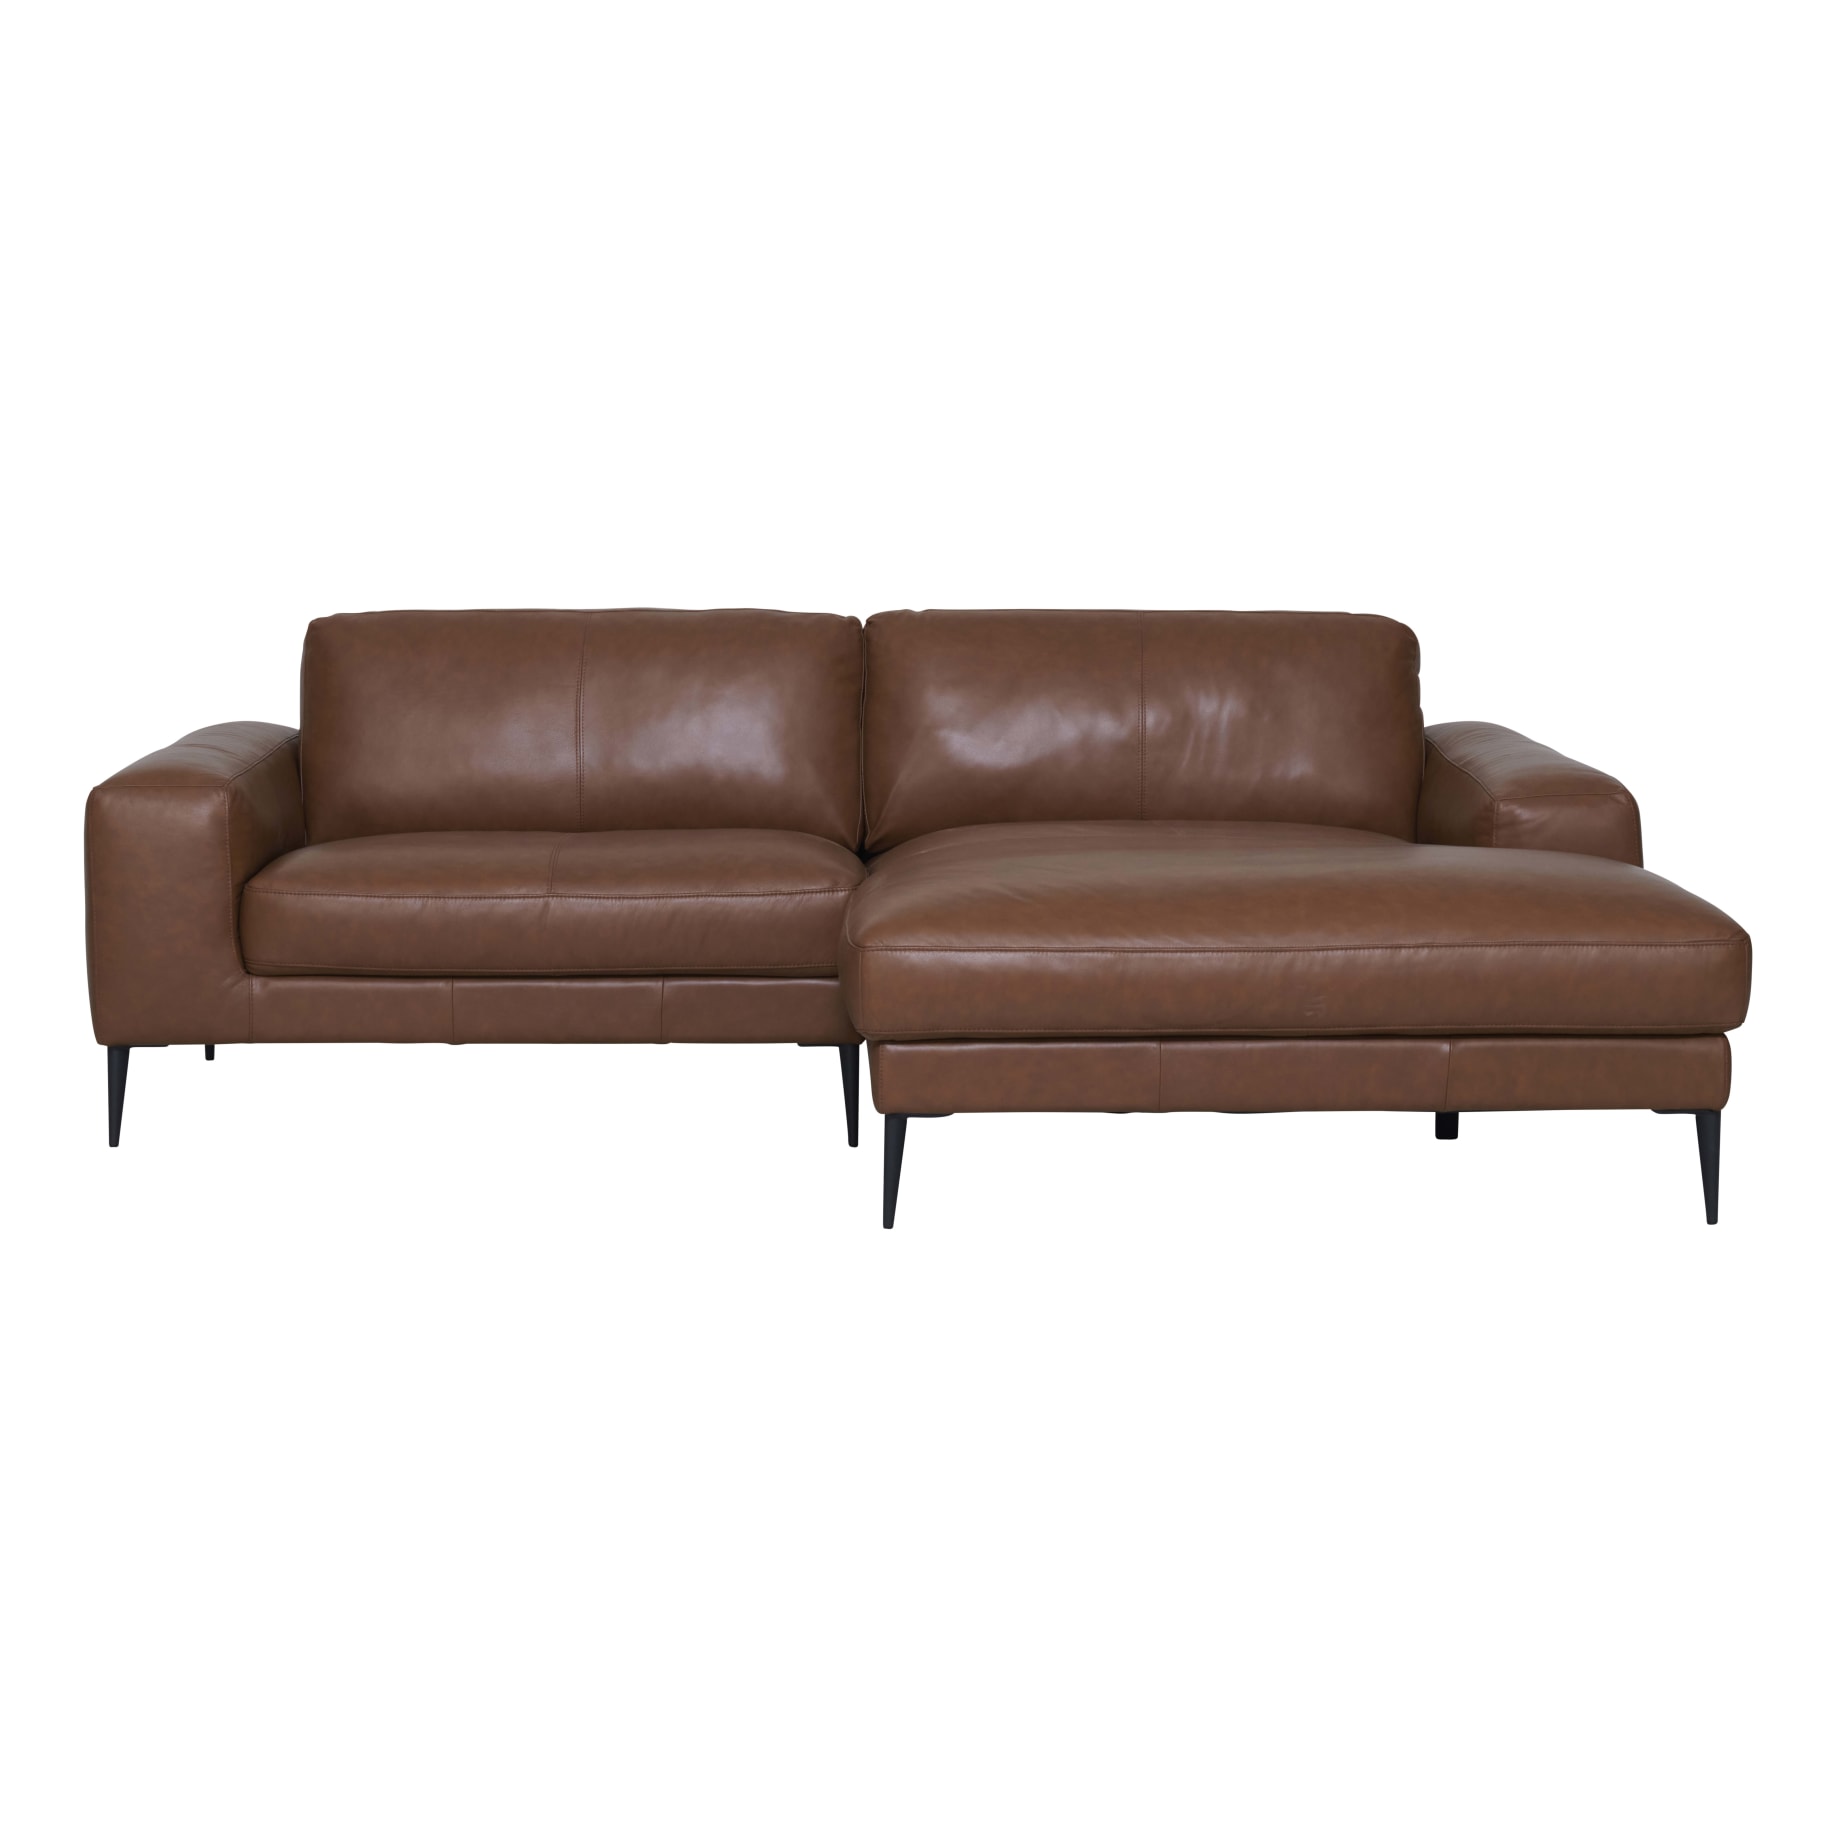 Amory Double Chaise RHF in Alpine Leather Camel